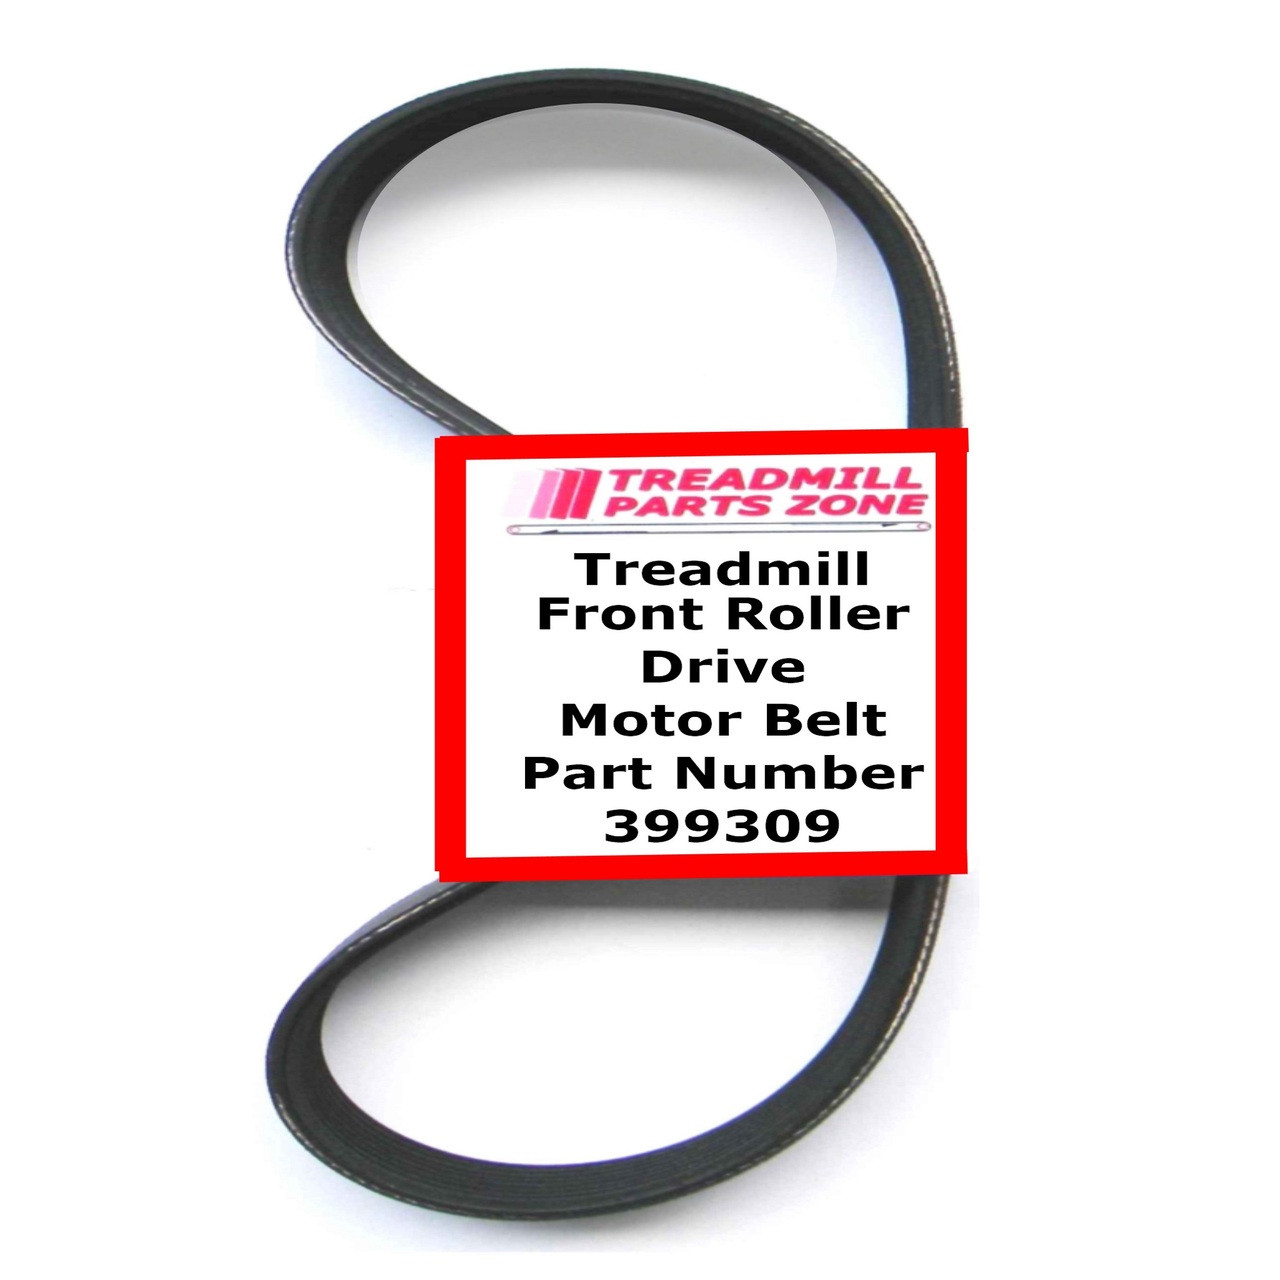 Sears Treadmill Model 23073.0 Drive Pulley Belt Part Number 399309